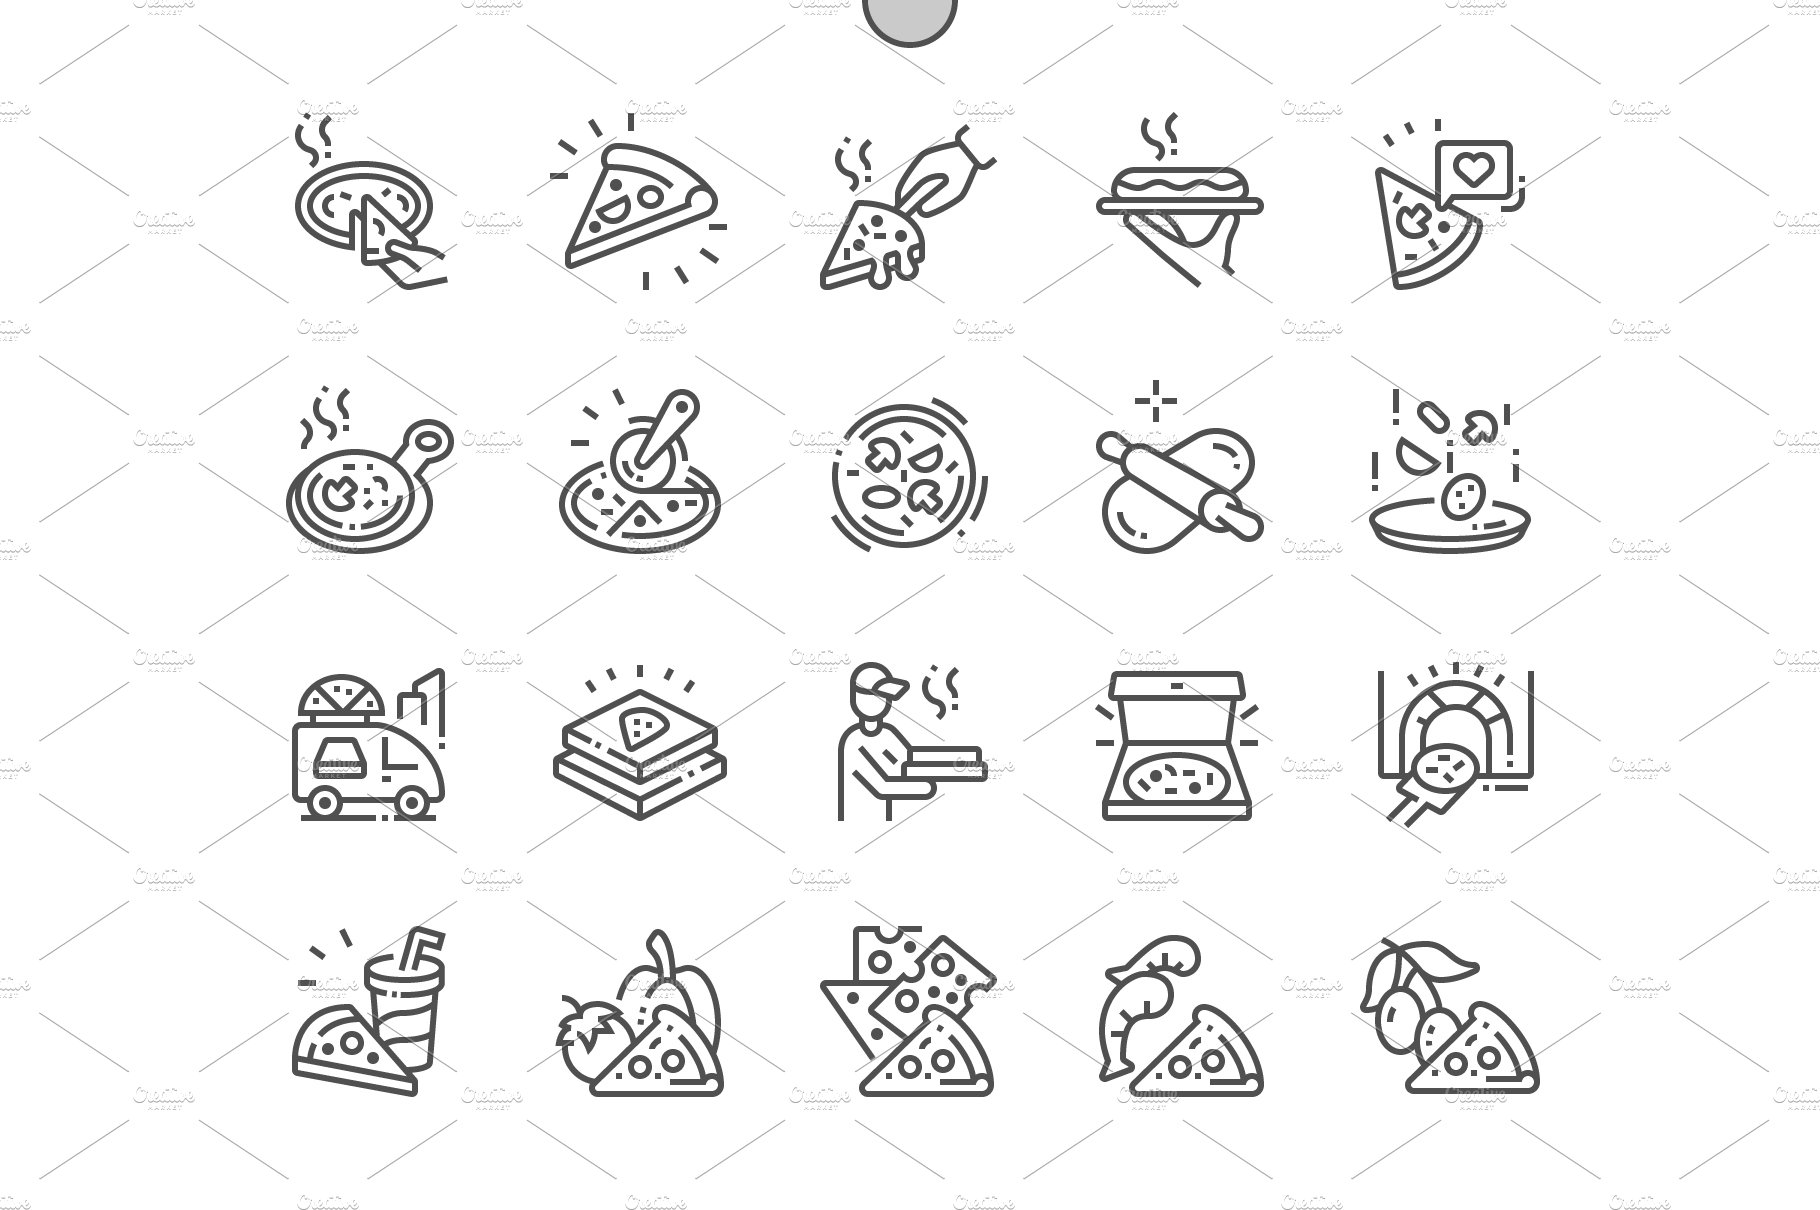 Pizza Line Icons cover image.